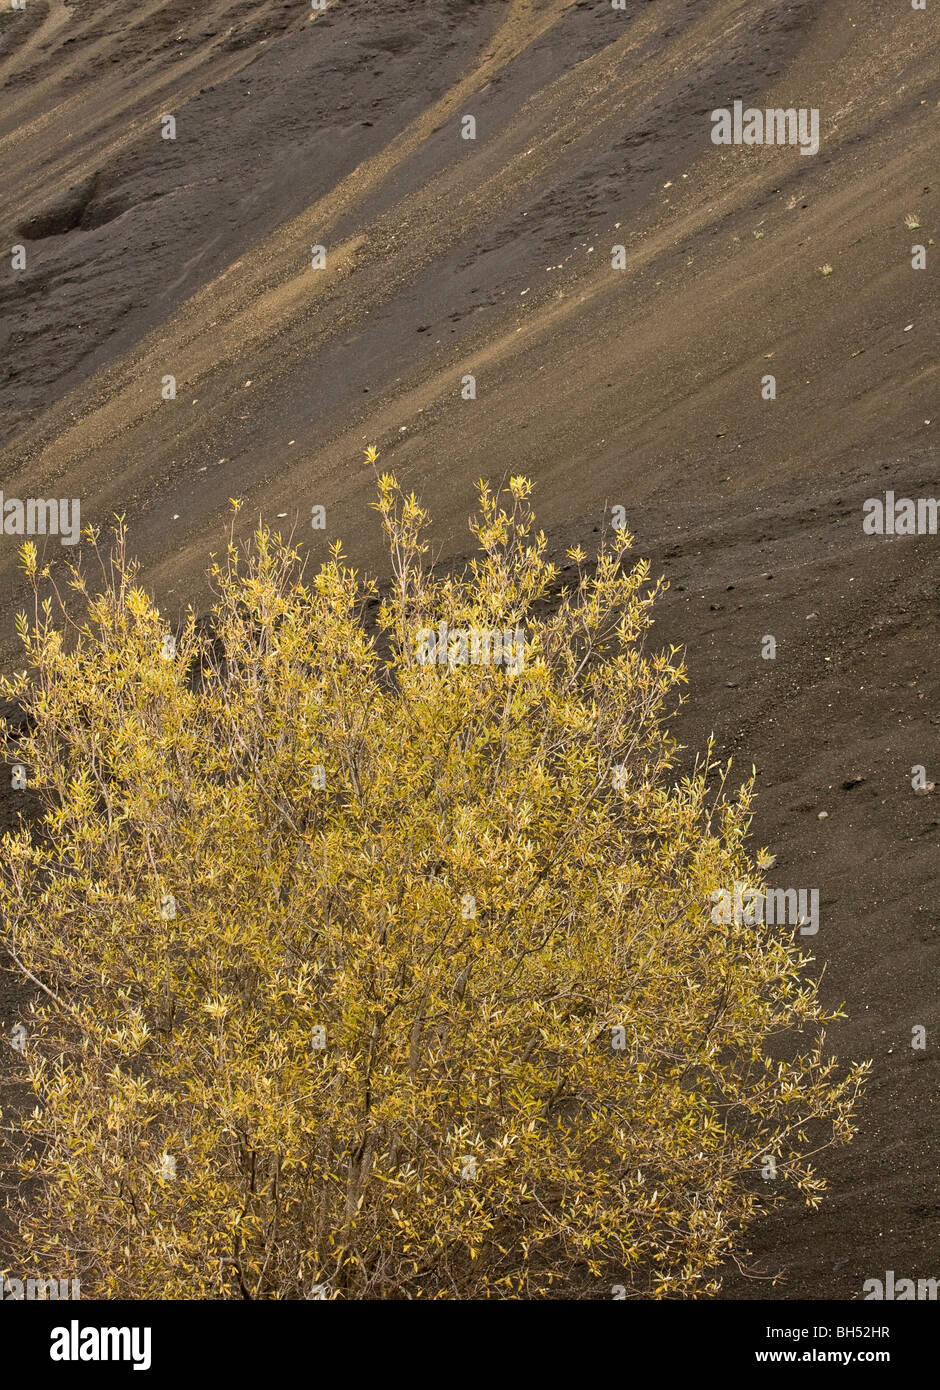 Tree growing amidst black lava rocks and sand in volcanic landscape. Stock Photo